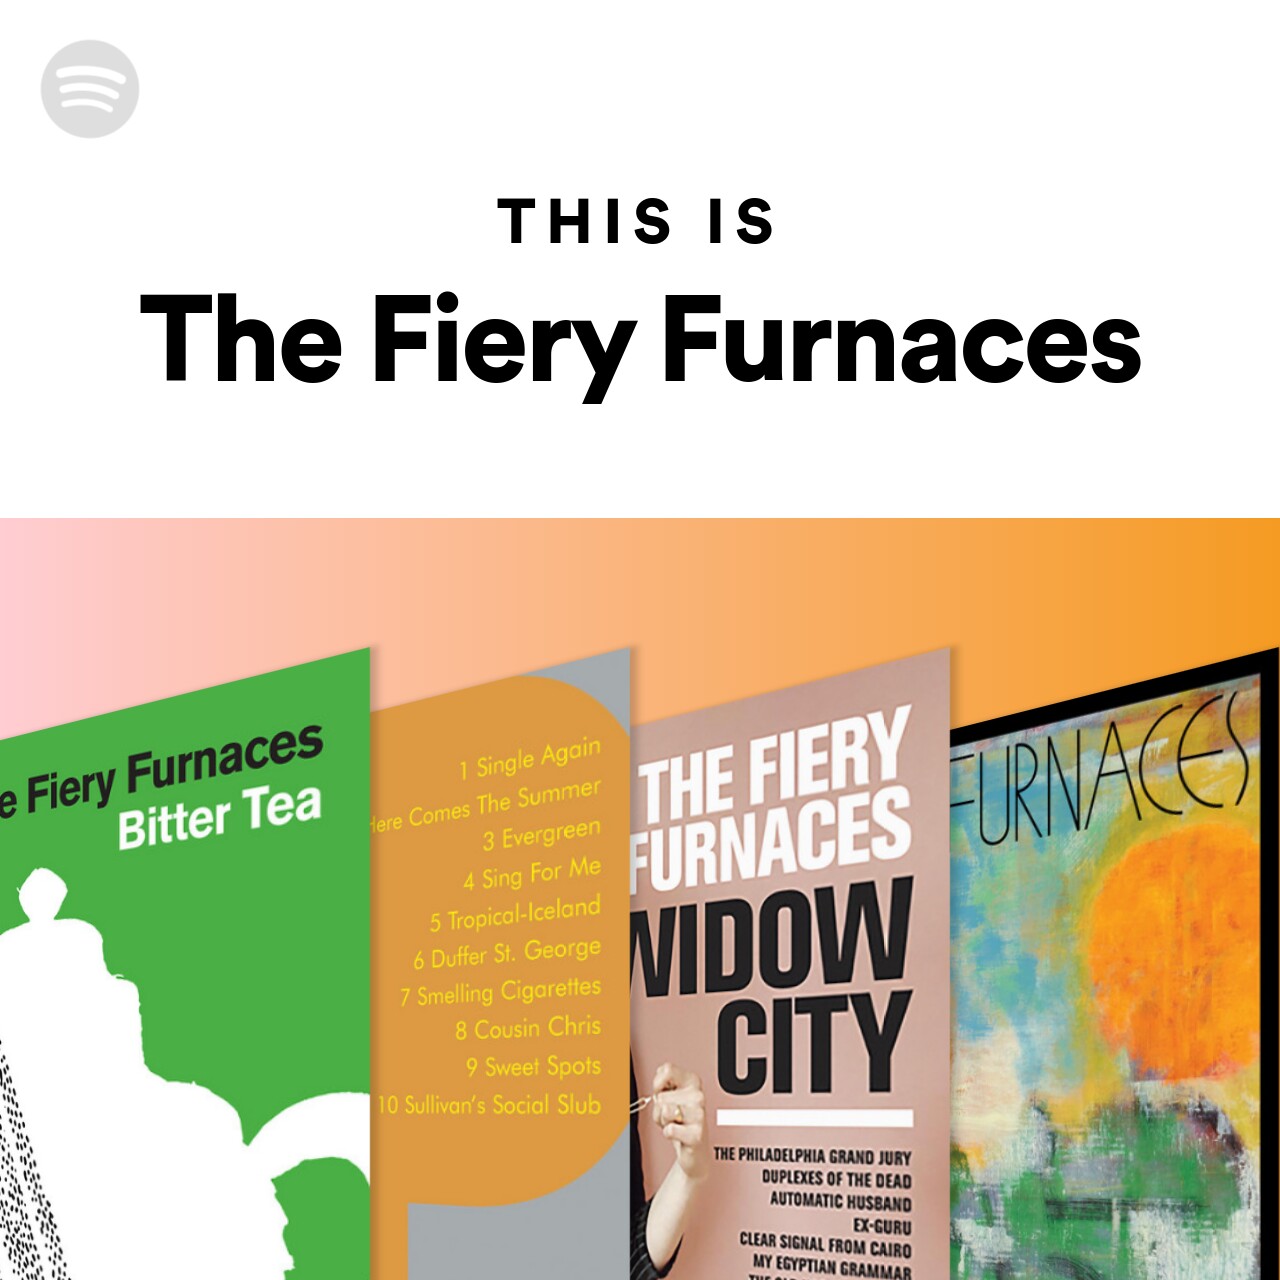 This Is The Fiery Furnaces